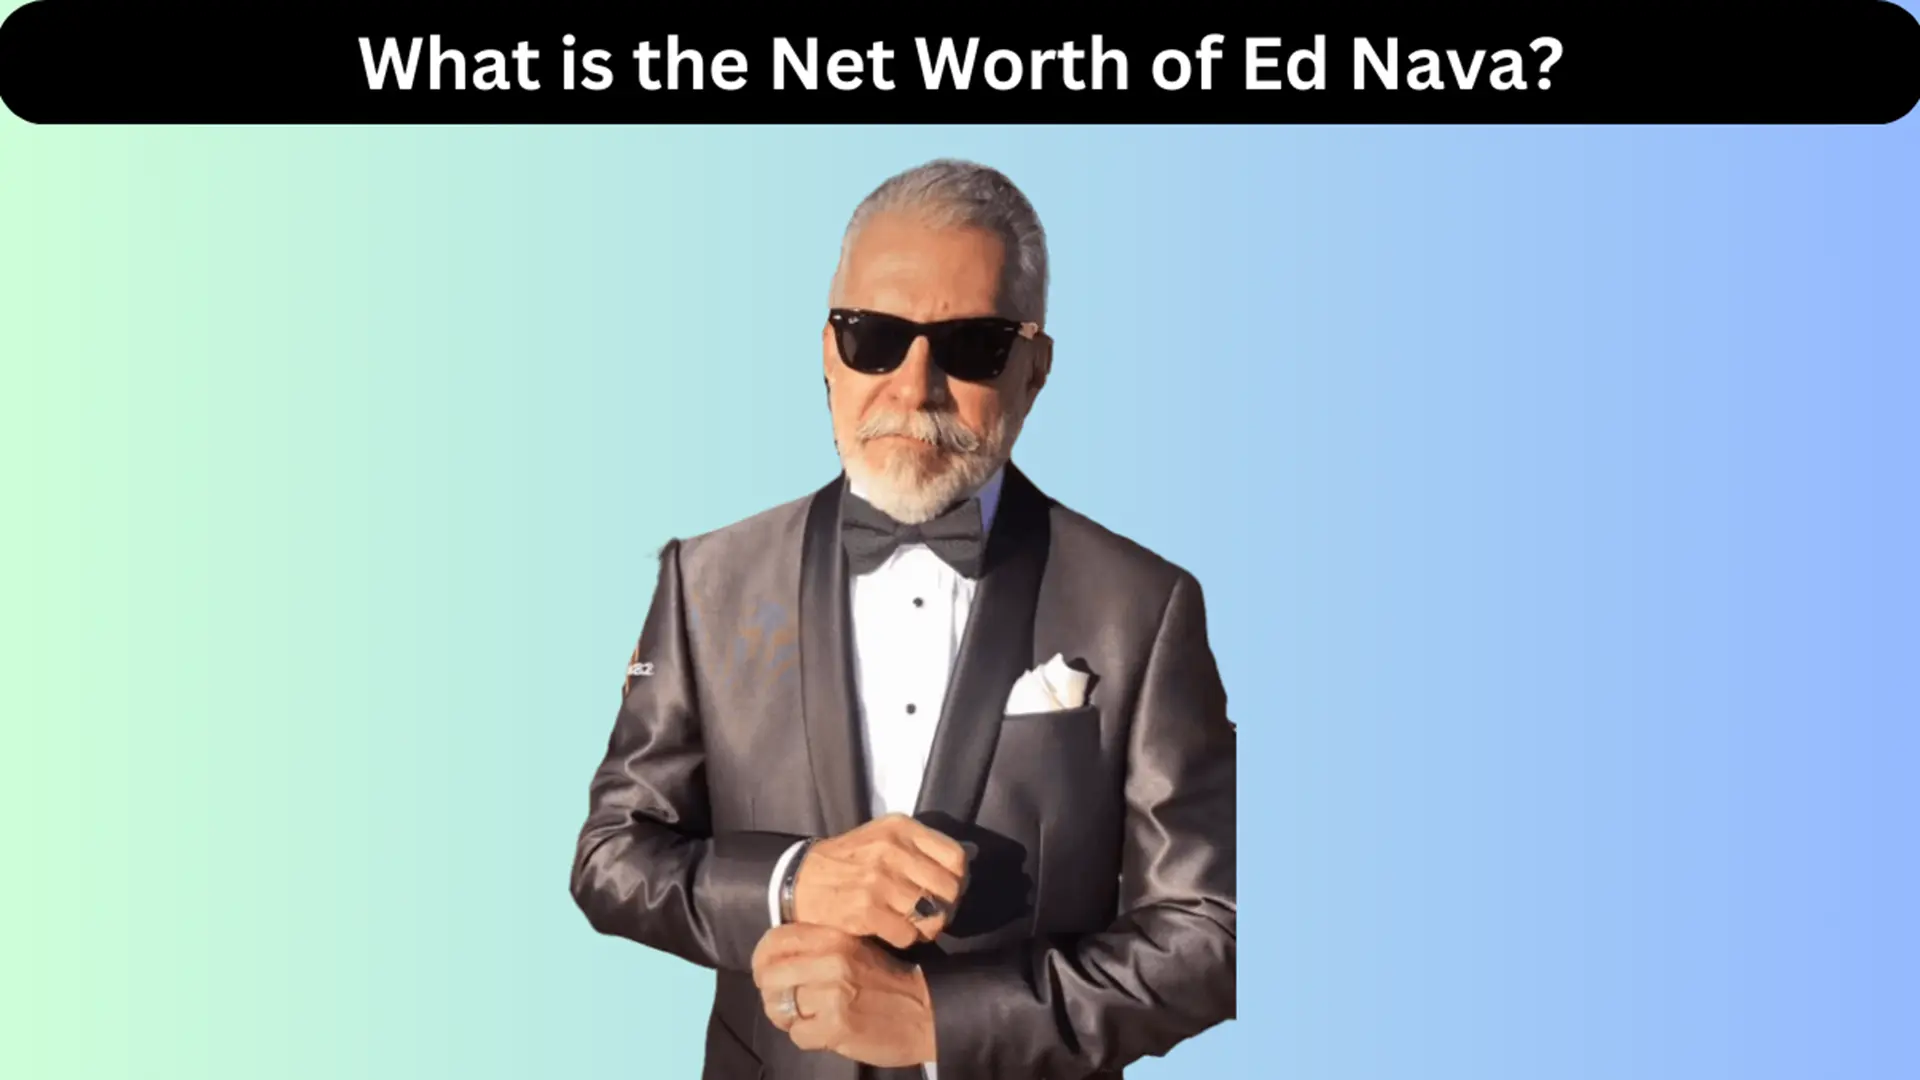 What is the Net Worth of Ed Nava